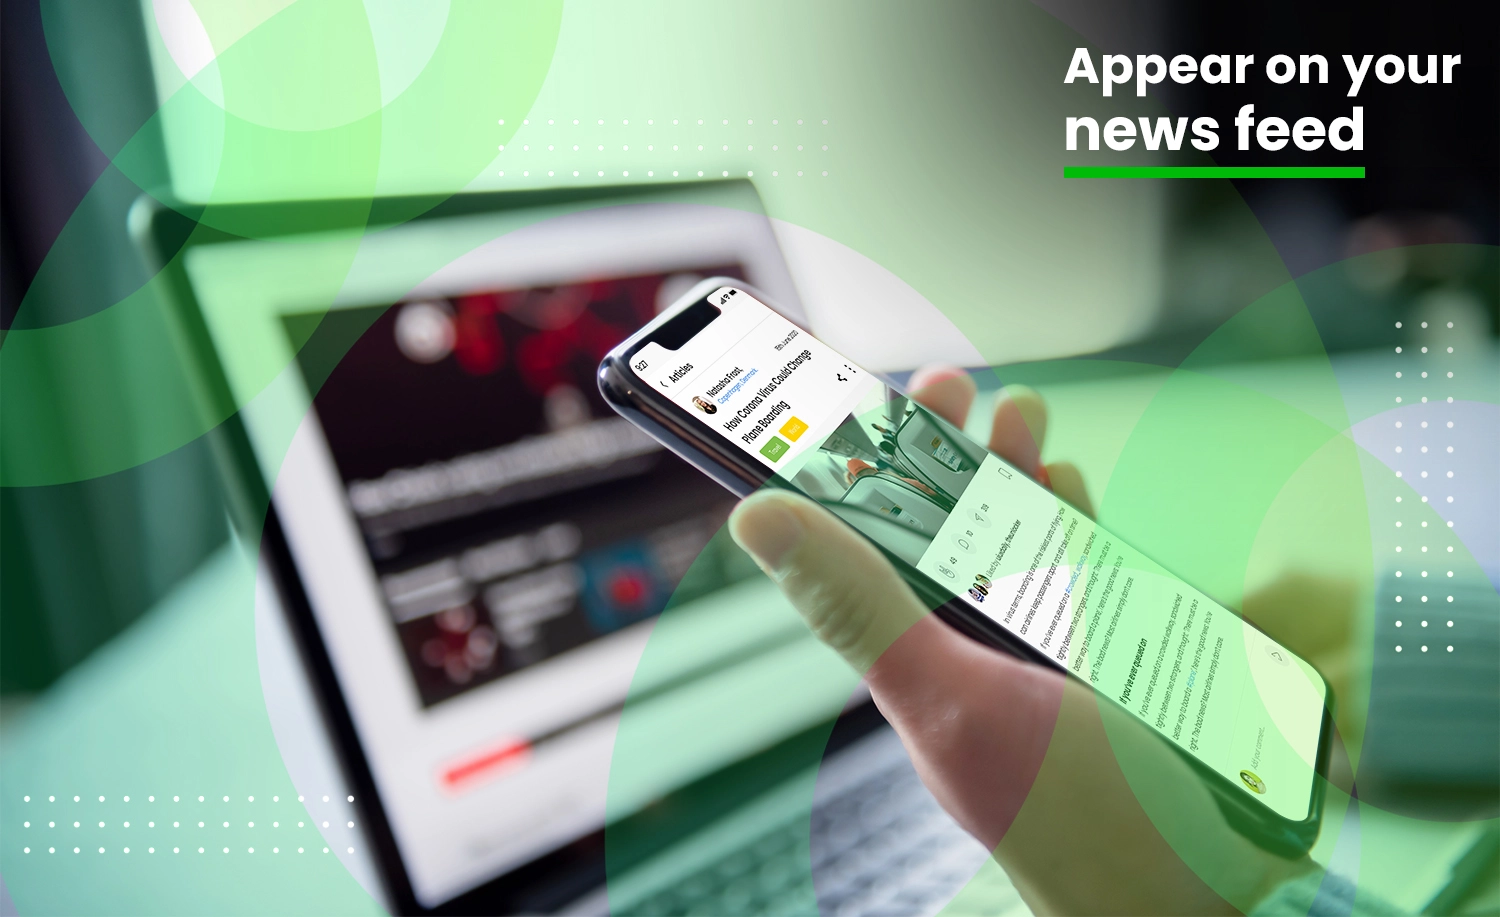 Appear on your news feed